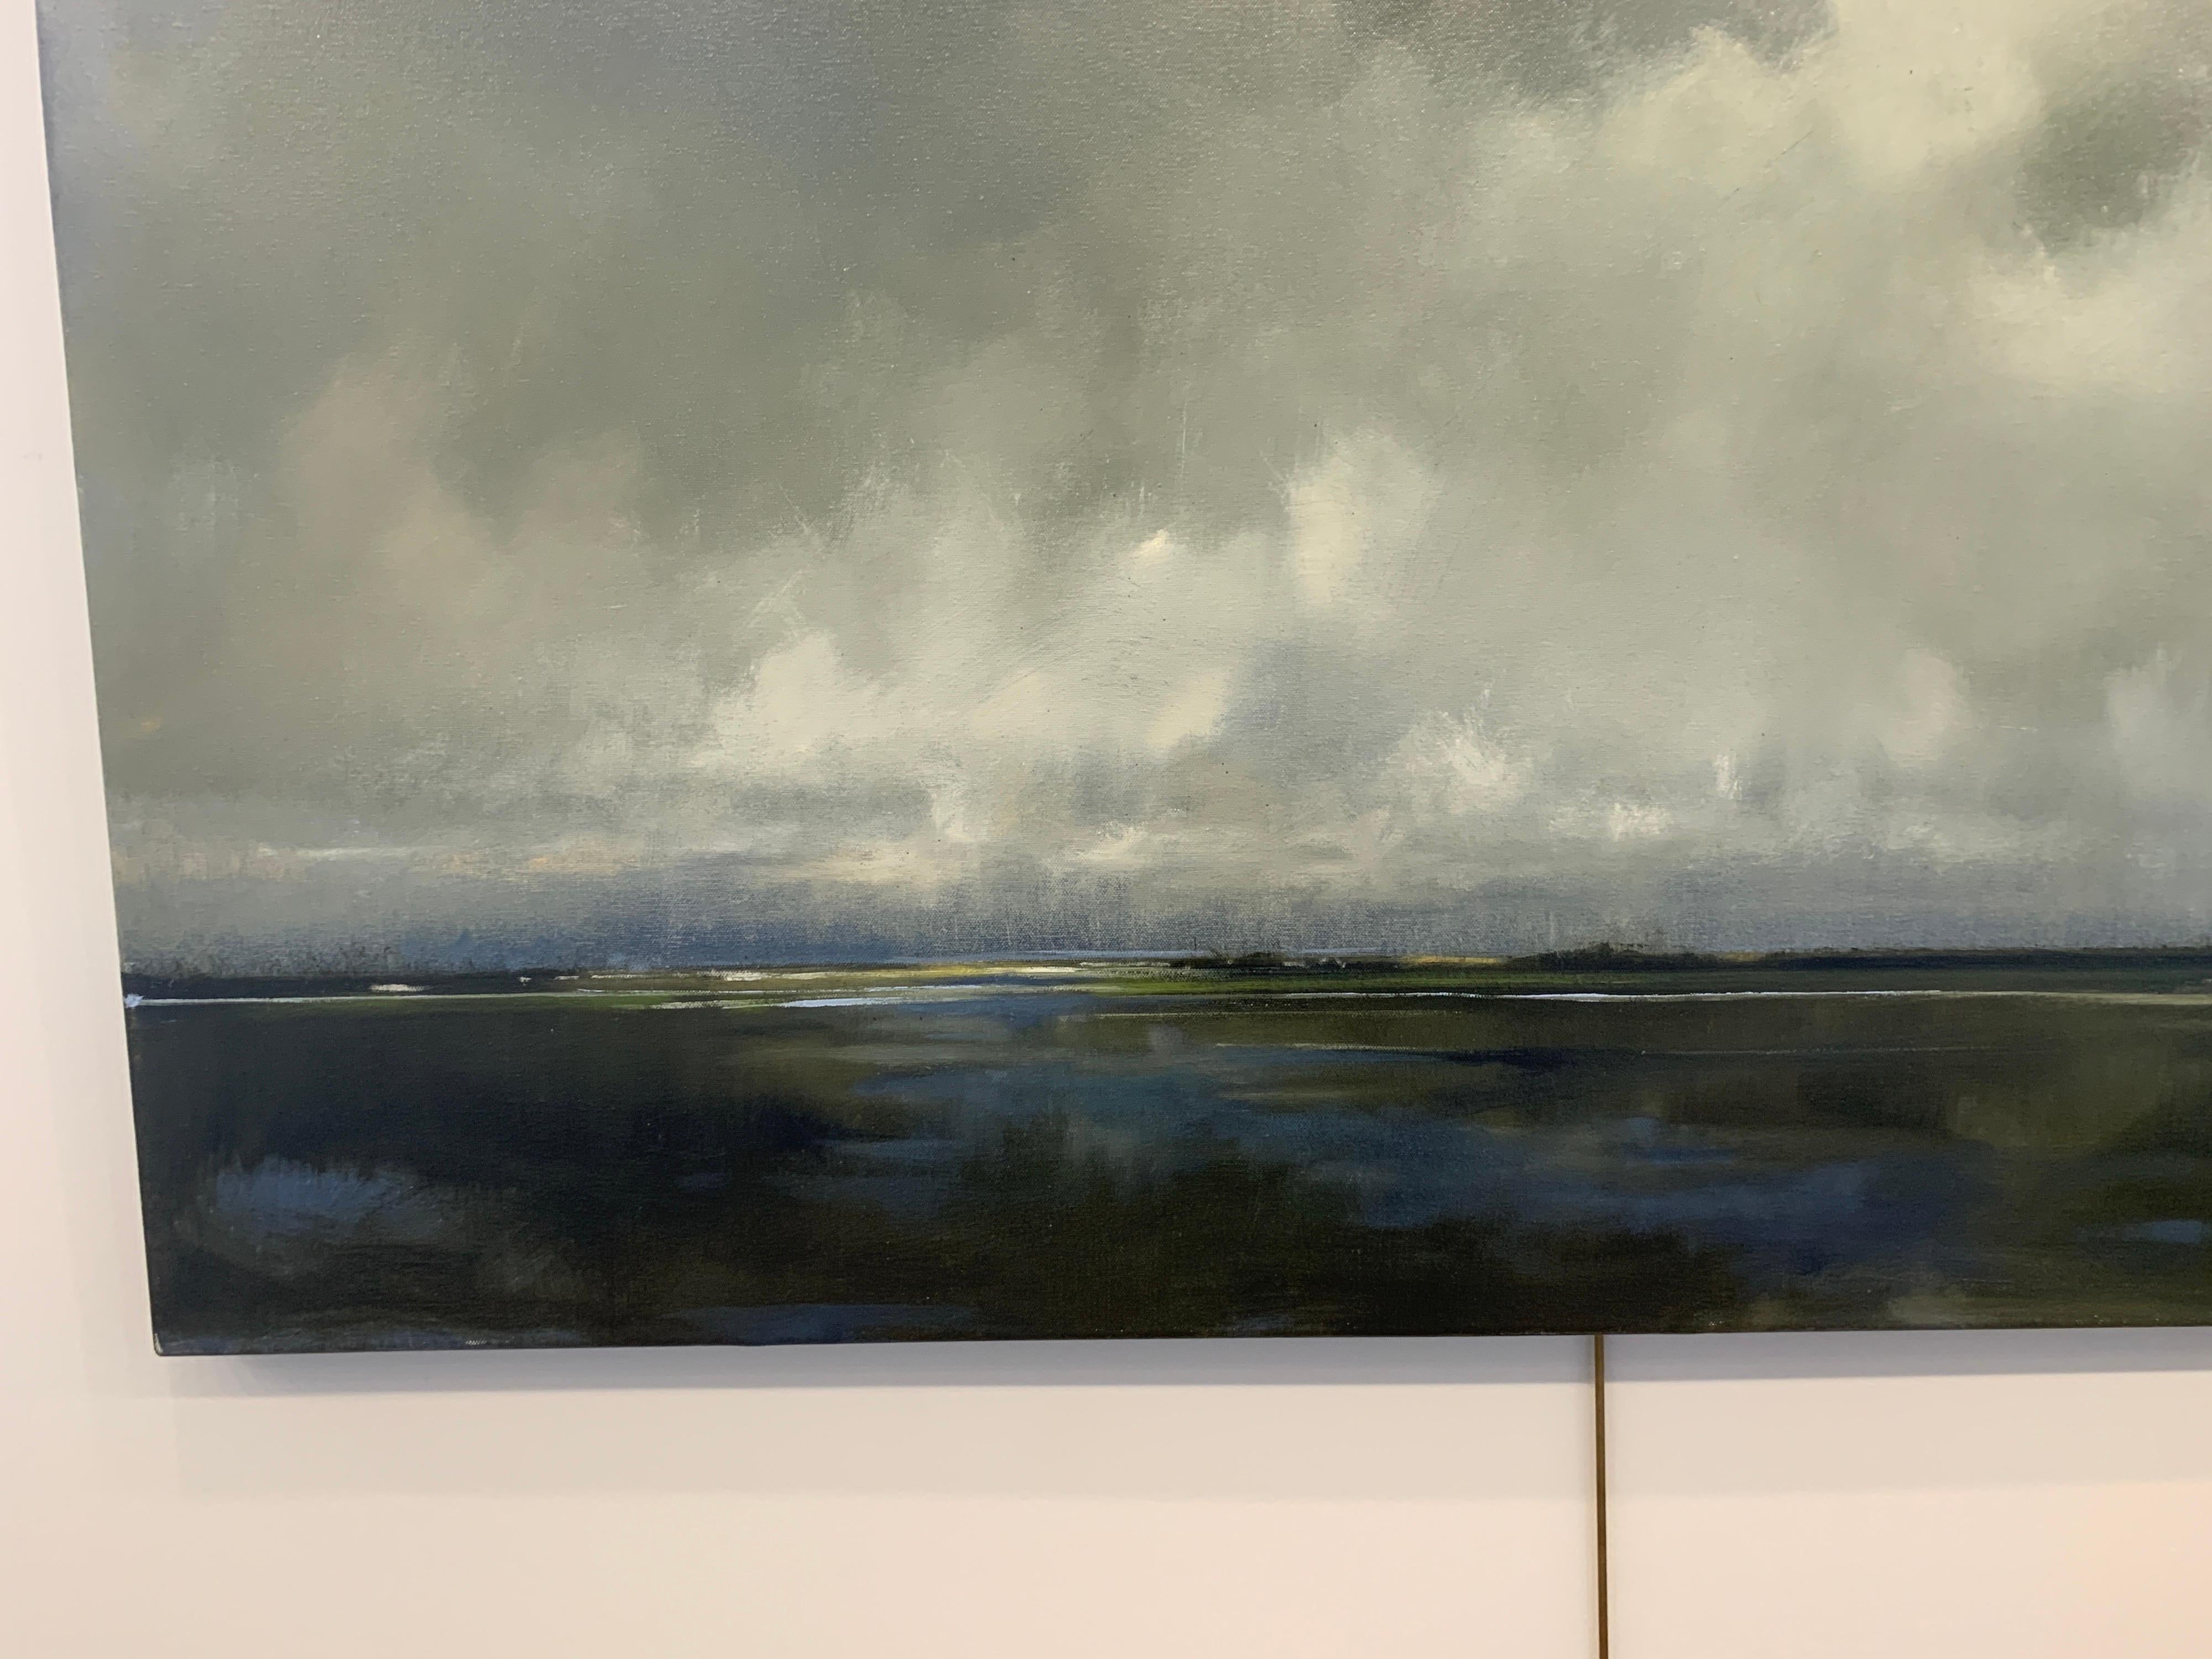 'Answer and Origin' is a large contemporary oil on canvas landscape painting created by American artist Doug Foltz in 2021. Featuring a palette made of grey, blue, white and greens among other tones, the painting depicts an exquisite marsh landscape